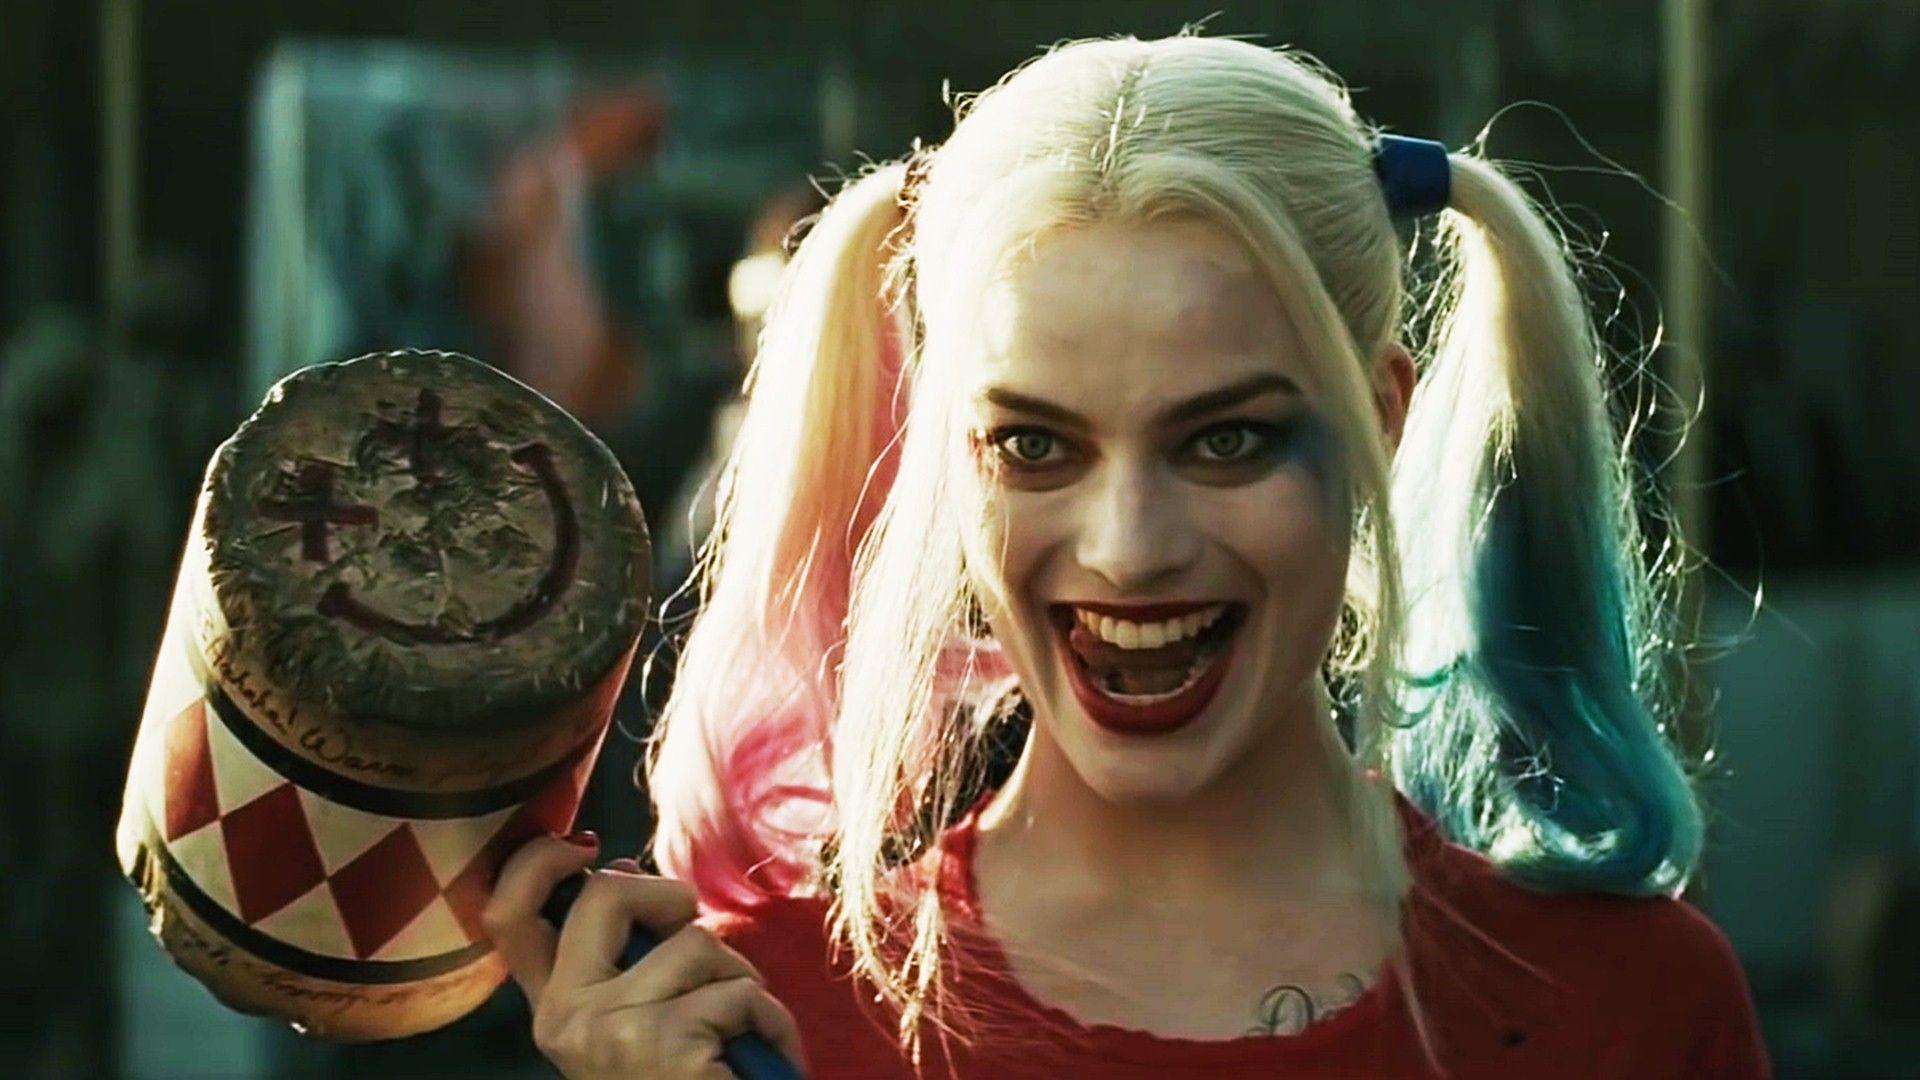 Suicide Squad Wallpaper HD Background, Image, Pics, Photo Free